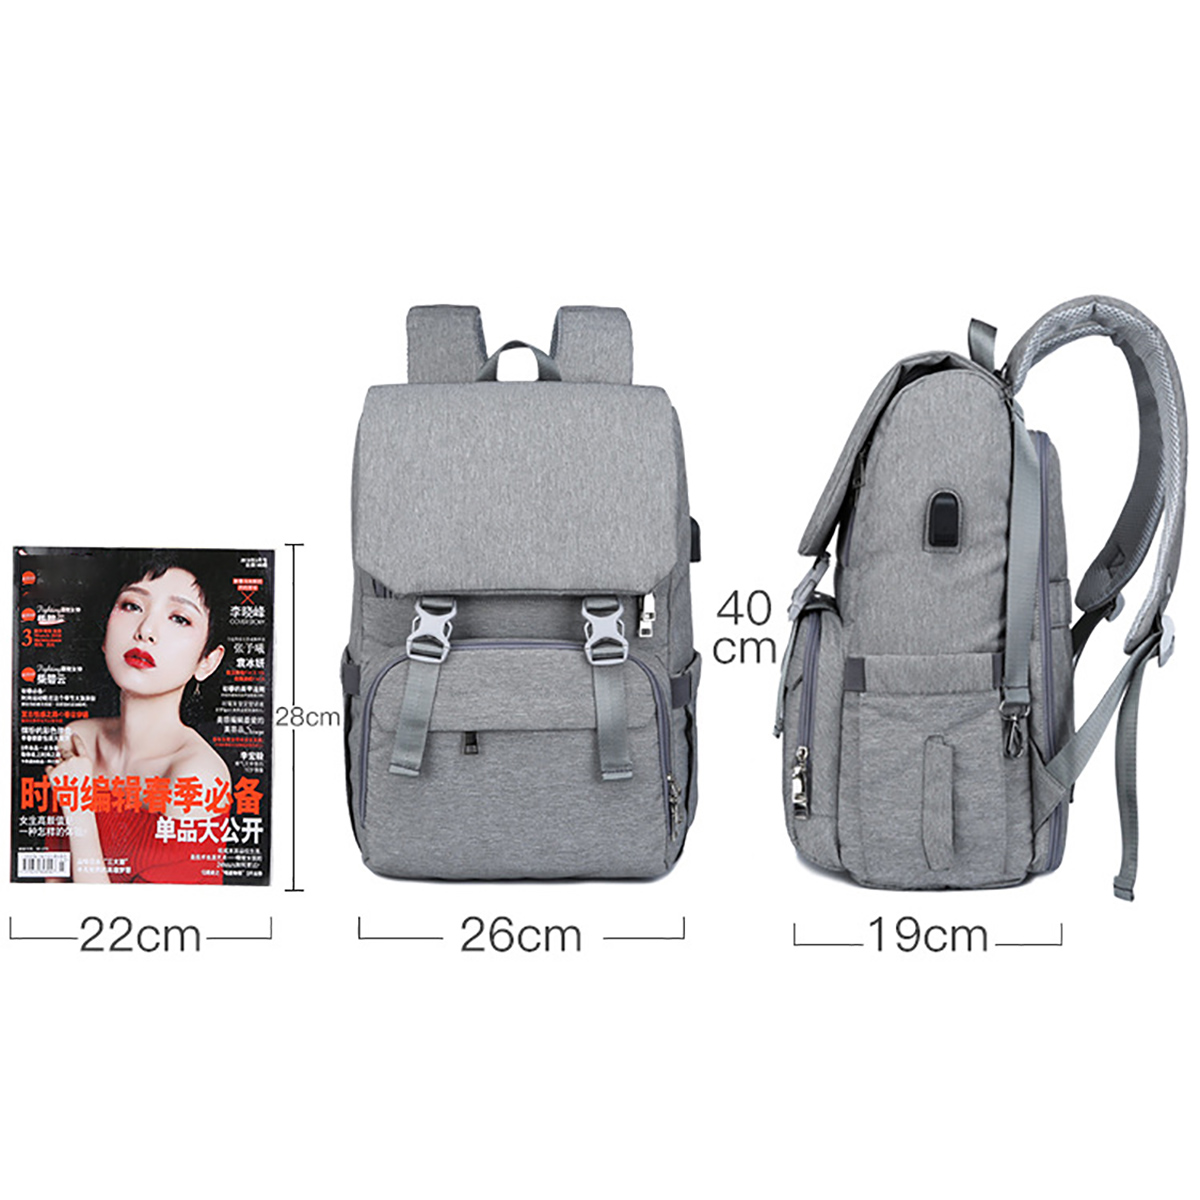 Outdoor-Mummy-Travel-Backpack-Large-Baby-Nappy-Changing-Bag--for-mom-Nursing-bag-1637117-2